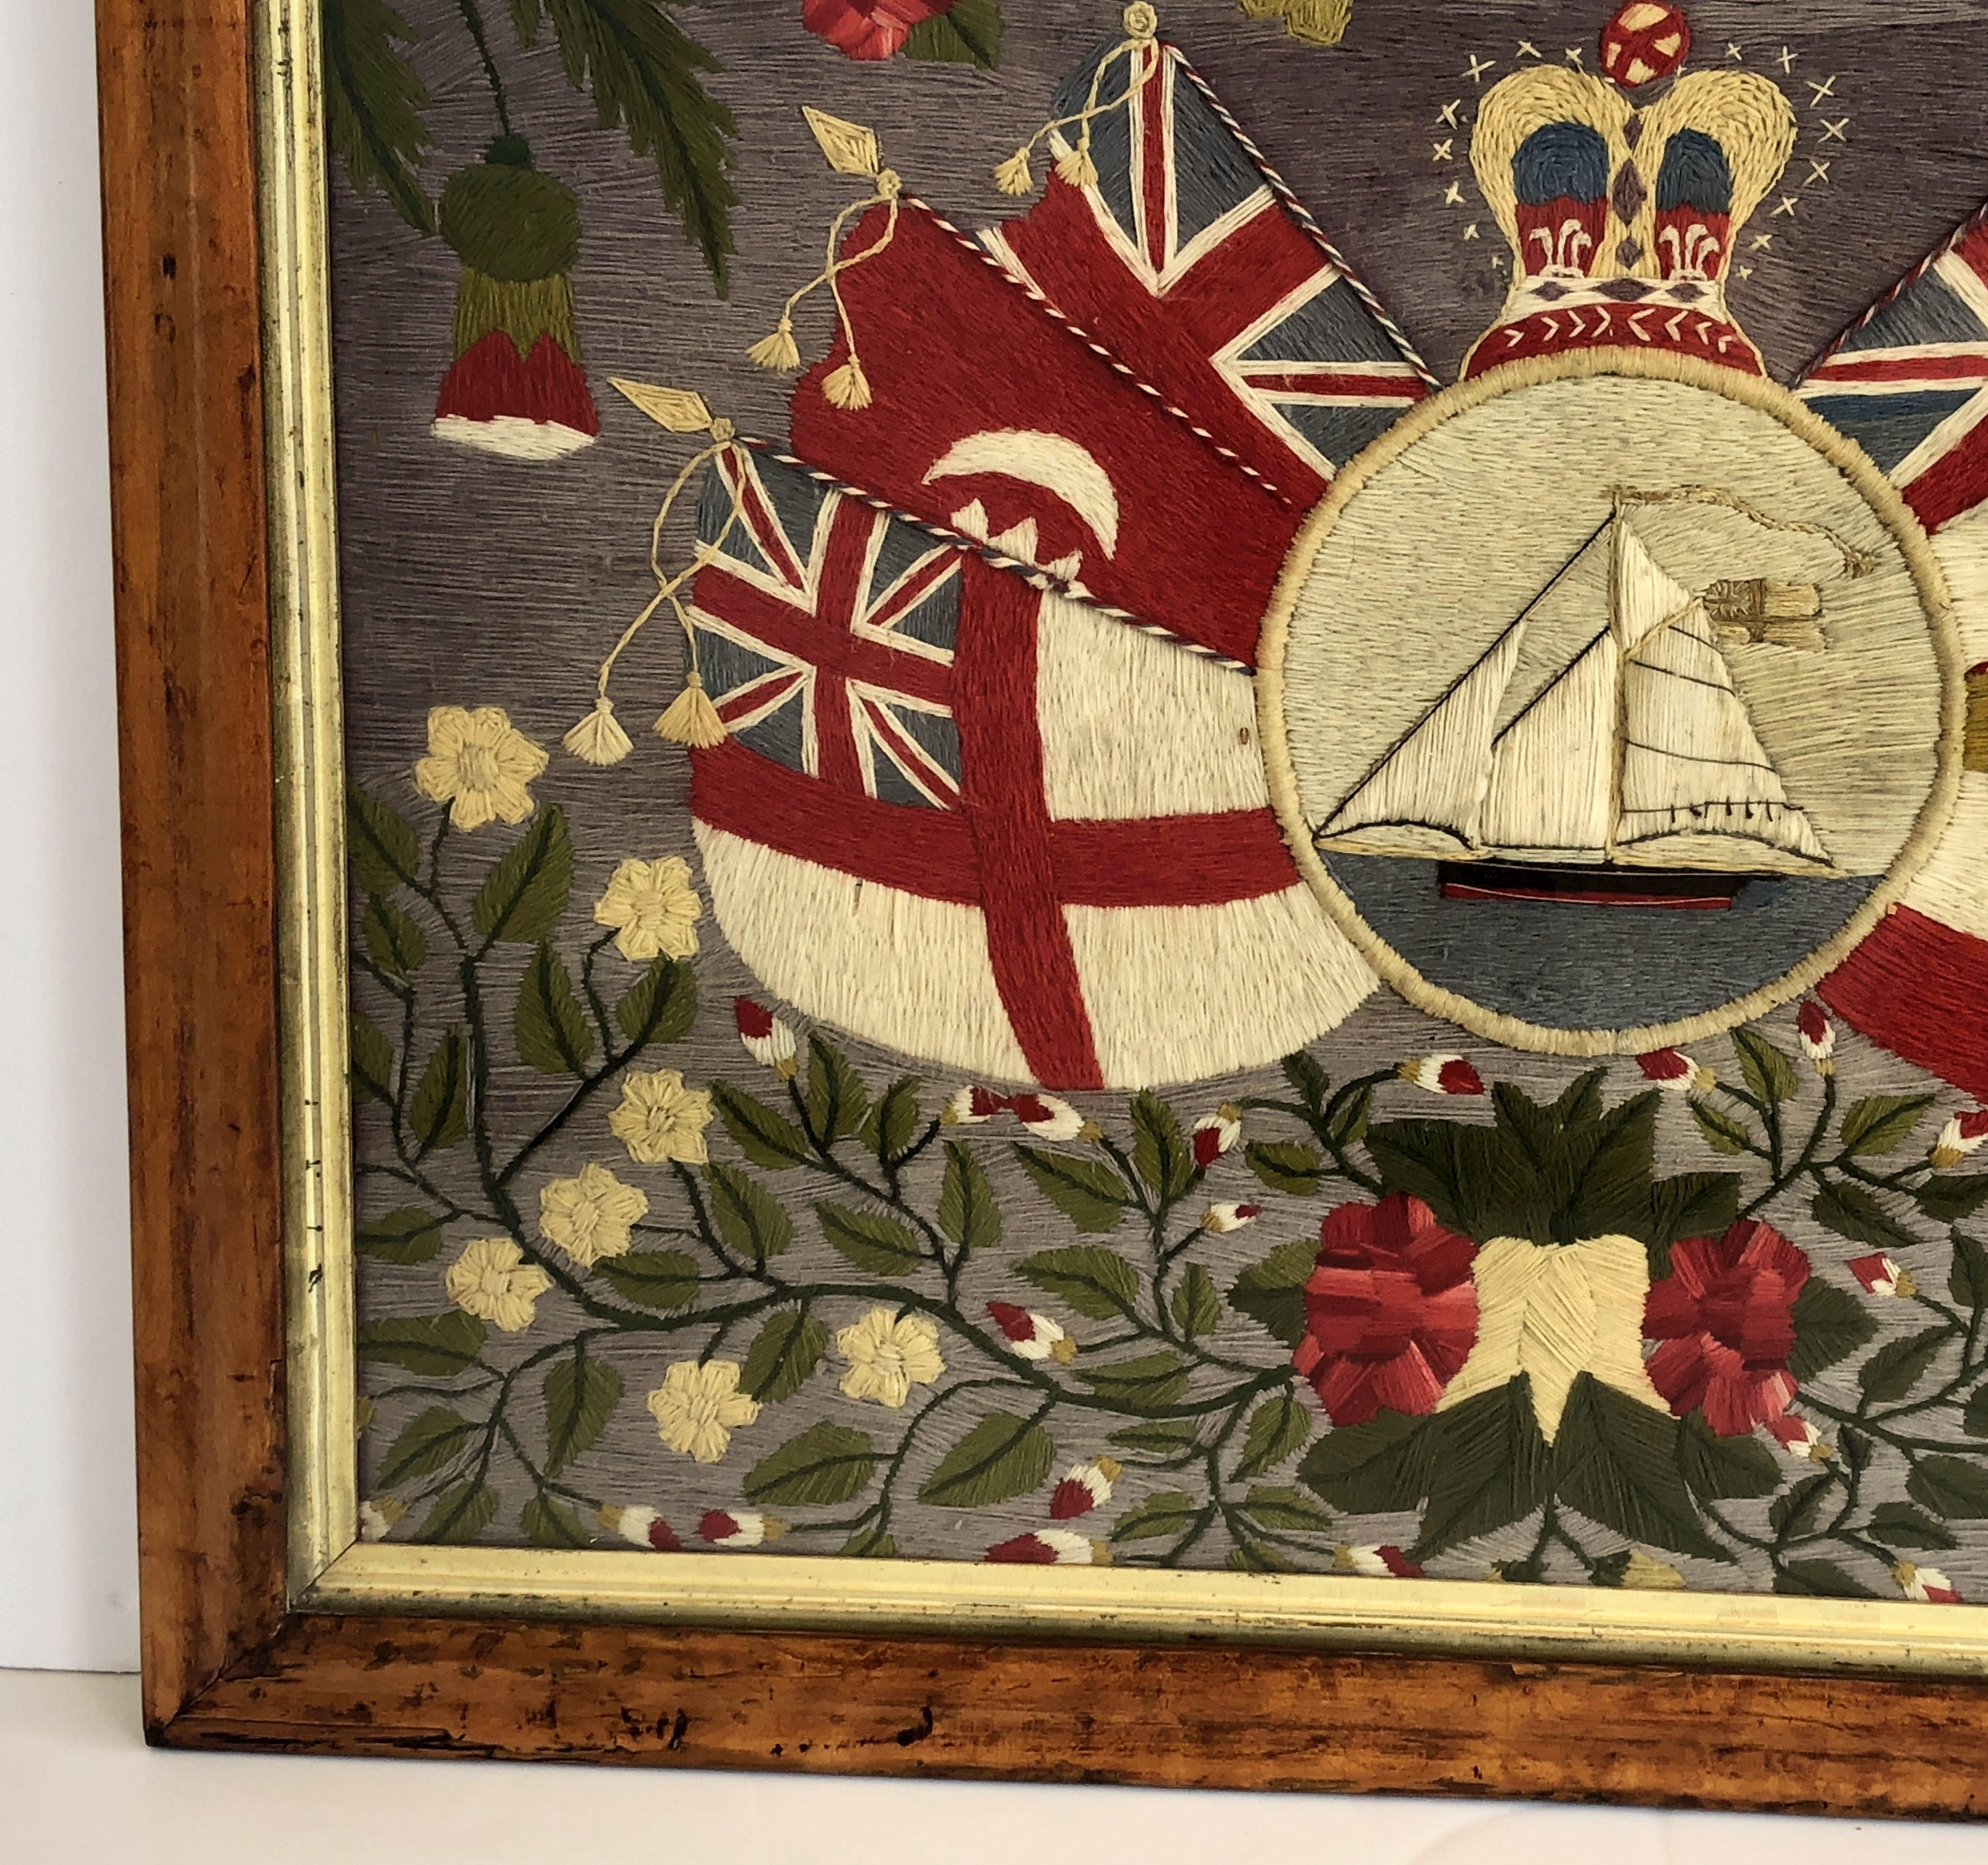 19th Century English Sailor's Woolwork or Woolie of a Sailing Ship ‘Crimean War Era’